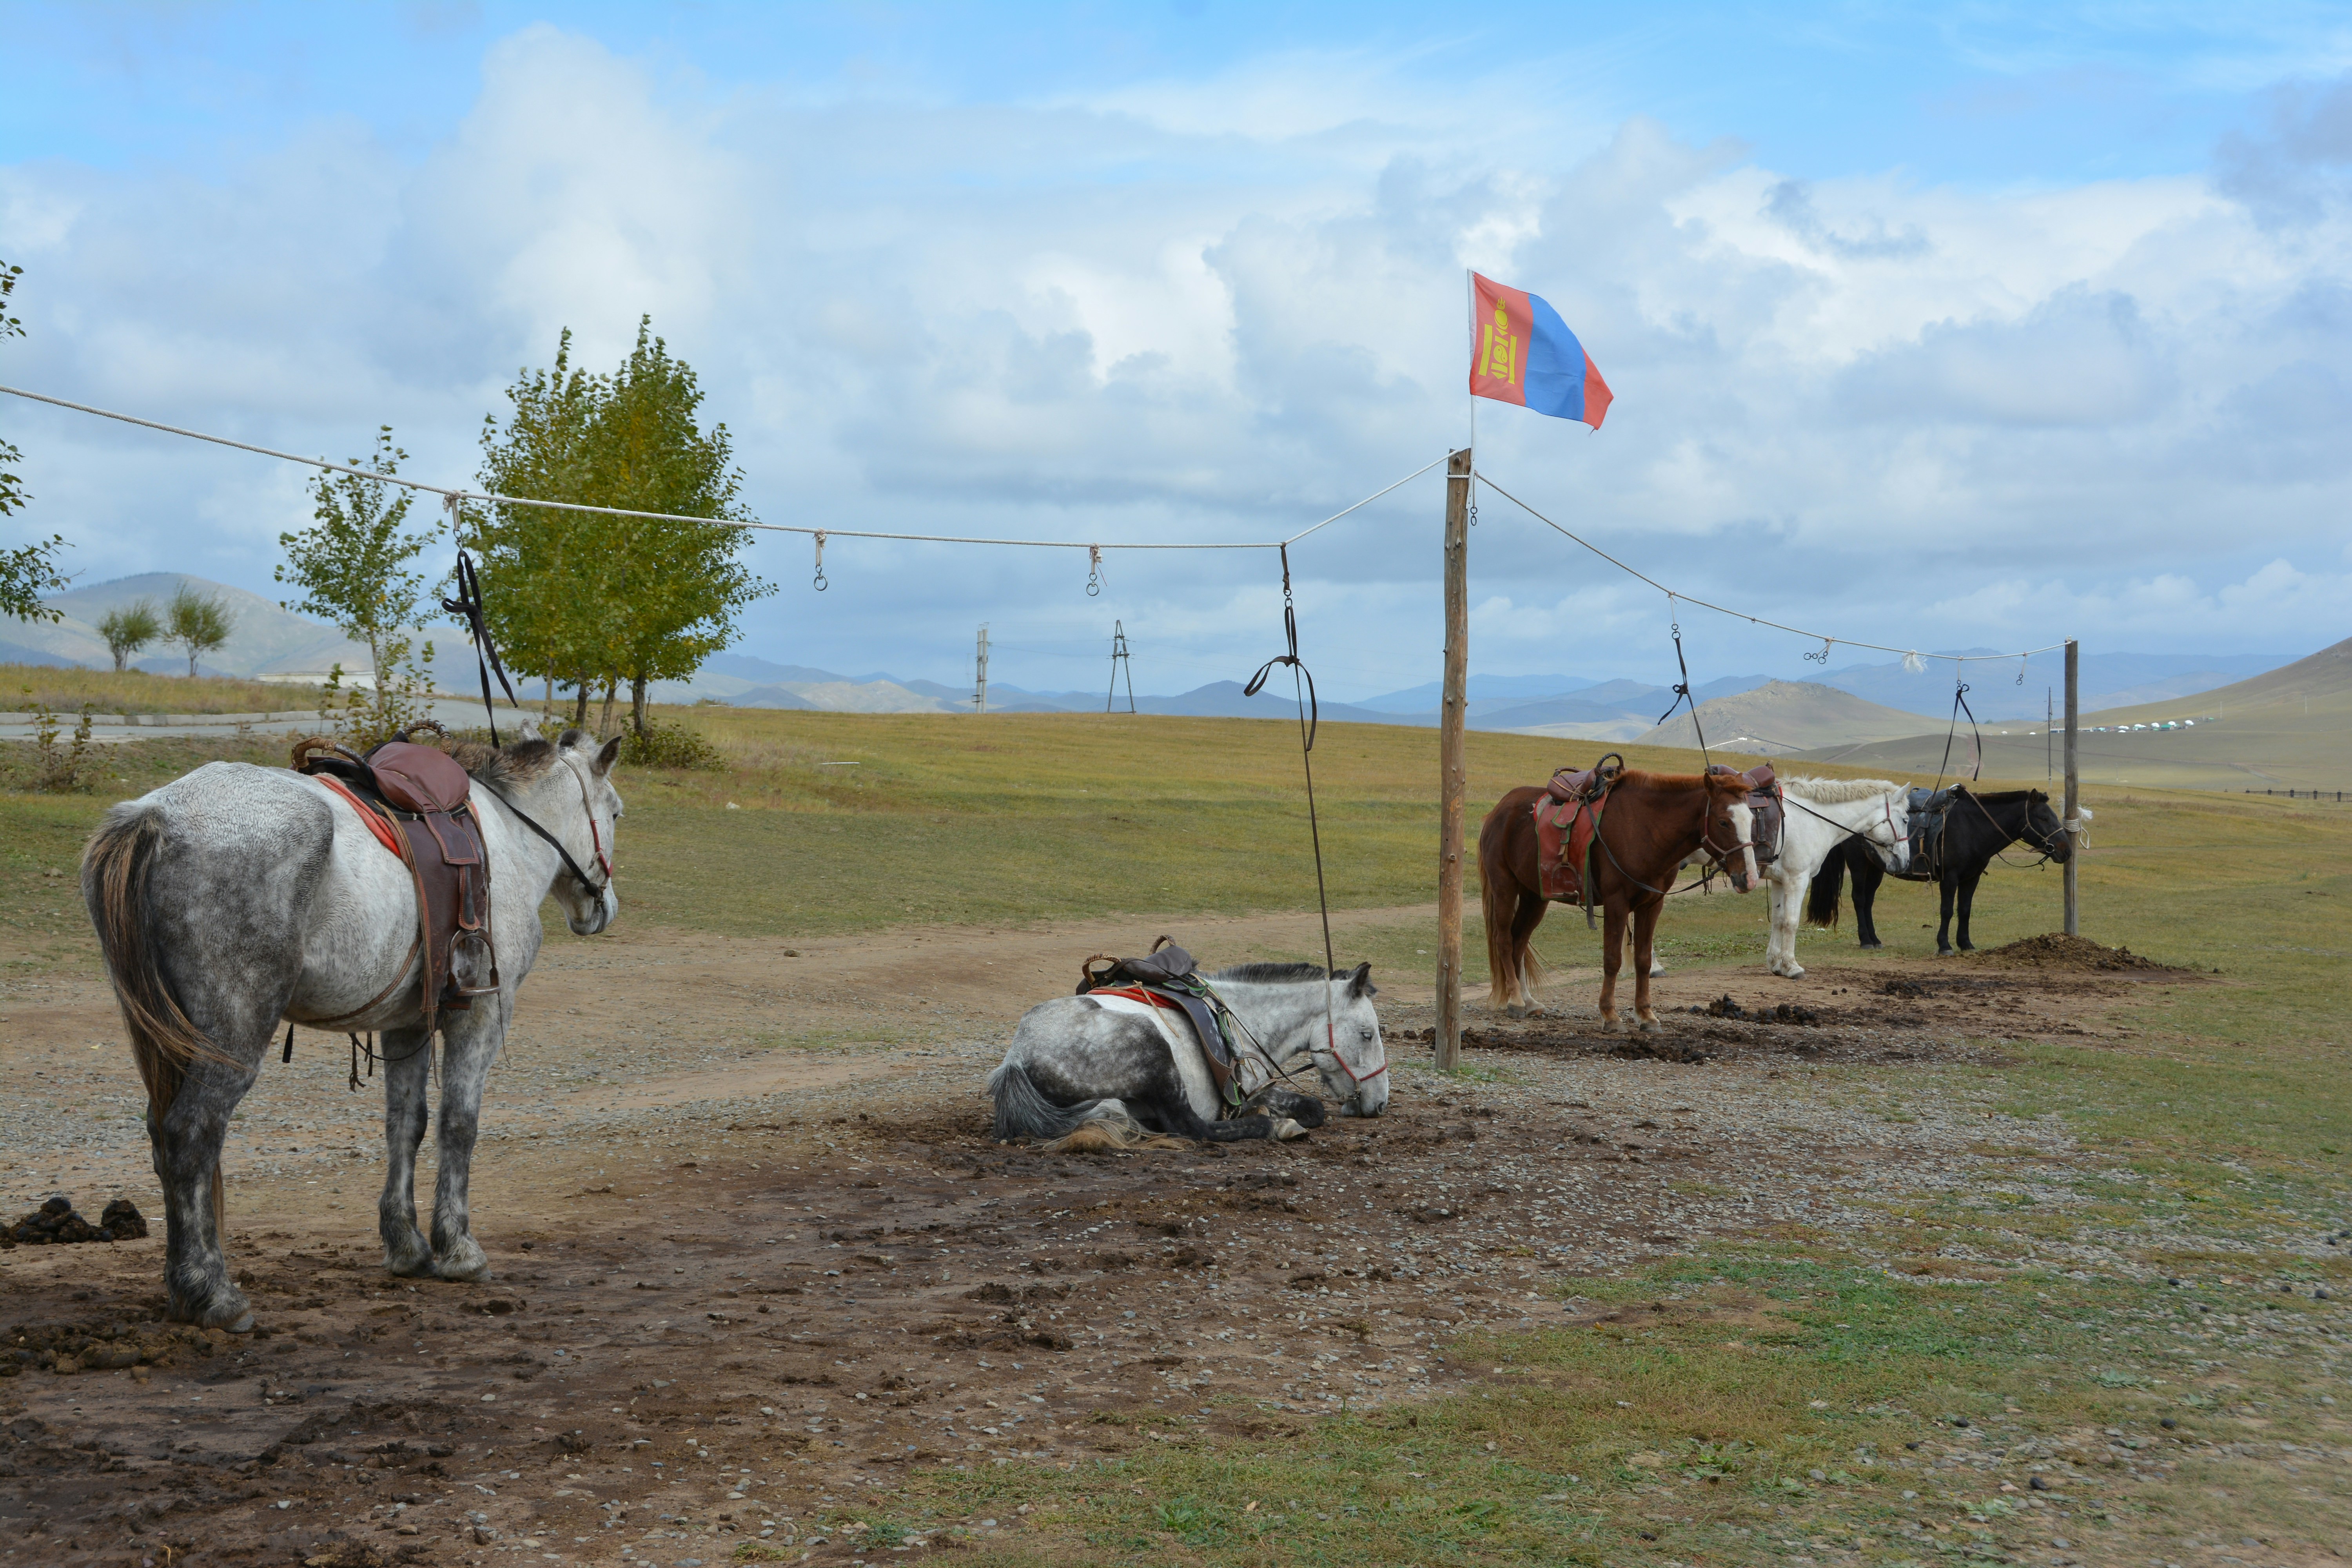 Whimsical illustration of preparing for a horse racing adventure in Mongolia